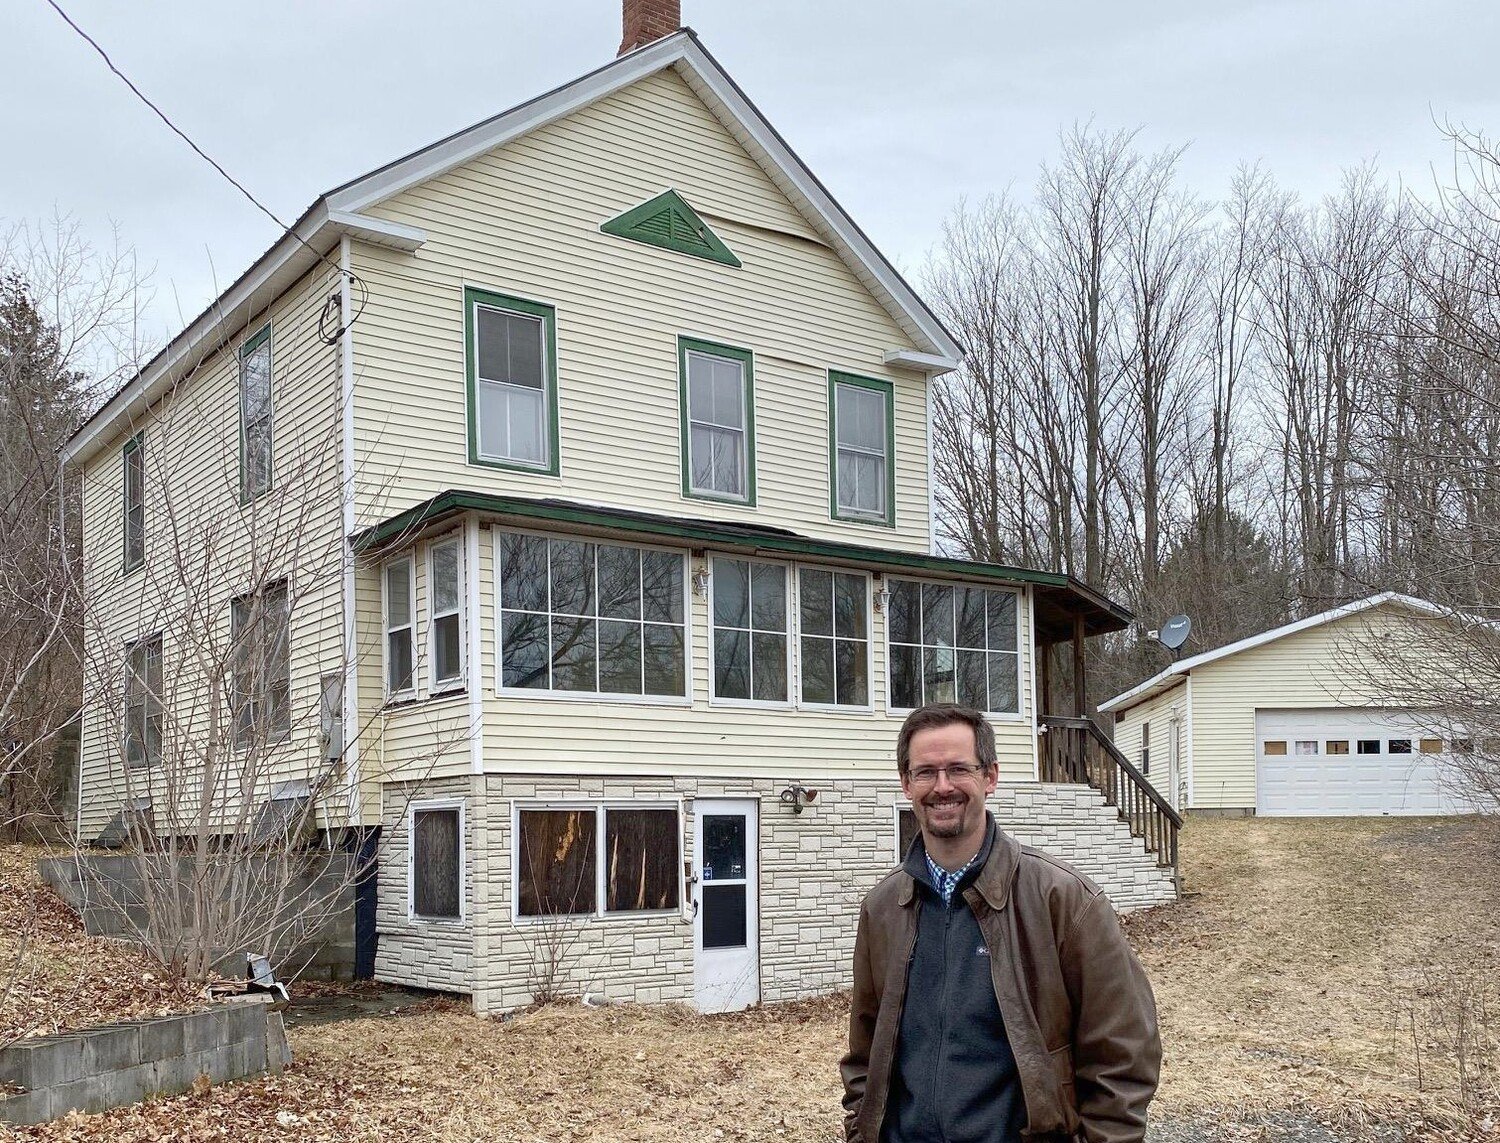 LAND BANK — Essex Town Supervisor Ken Hughes stands in front of a home he was to rehabilitate using a land bank model.